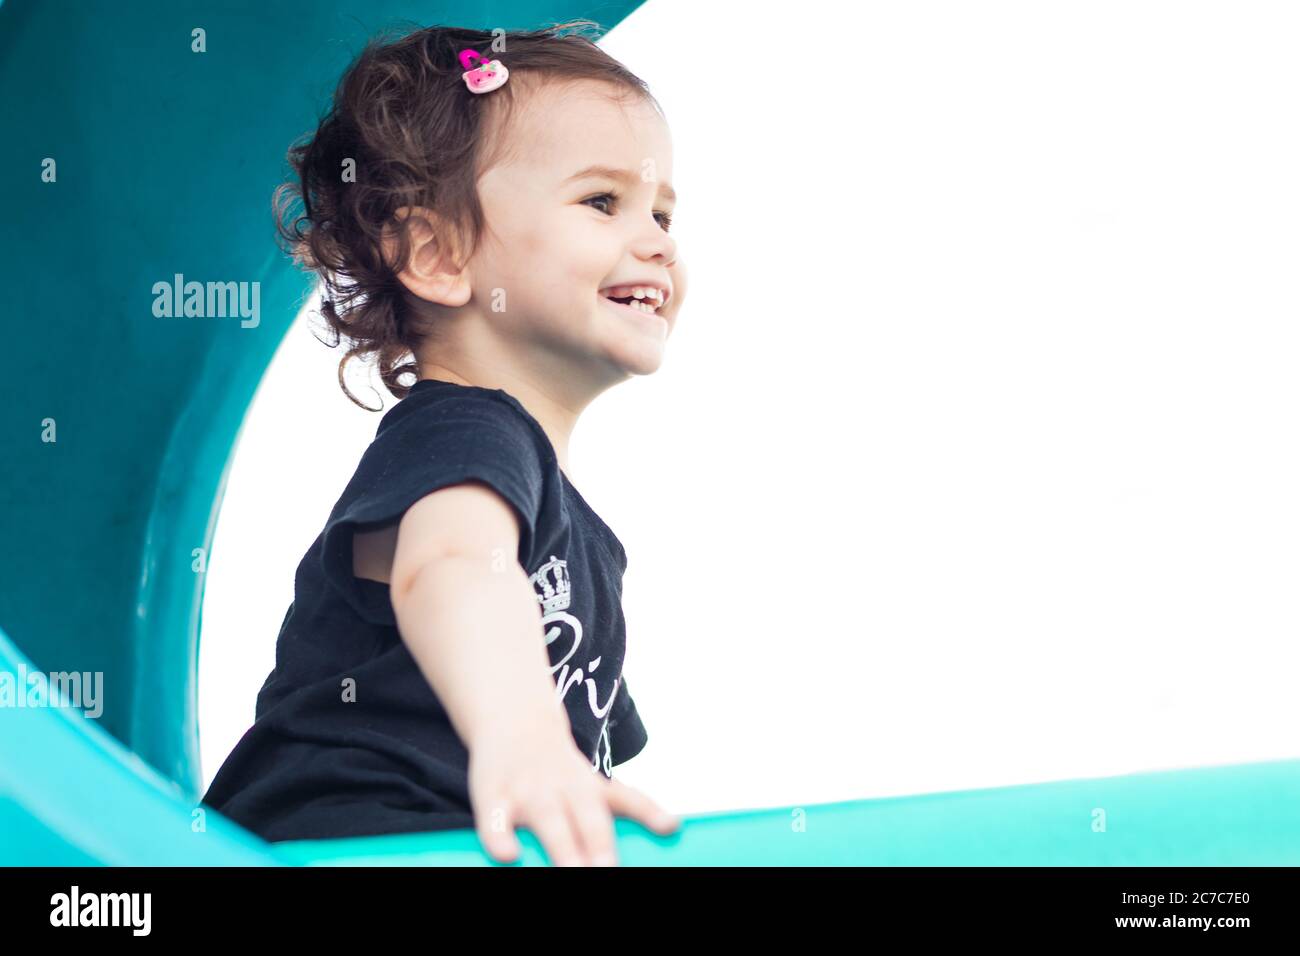 a cute little baby girl on a blue slide in a brith day. Stock Photo